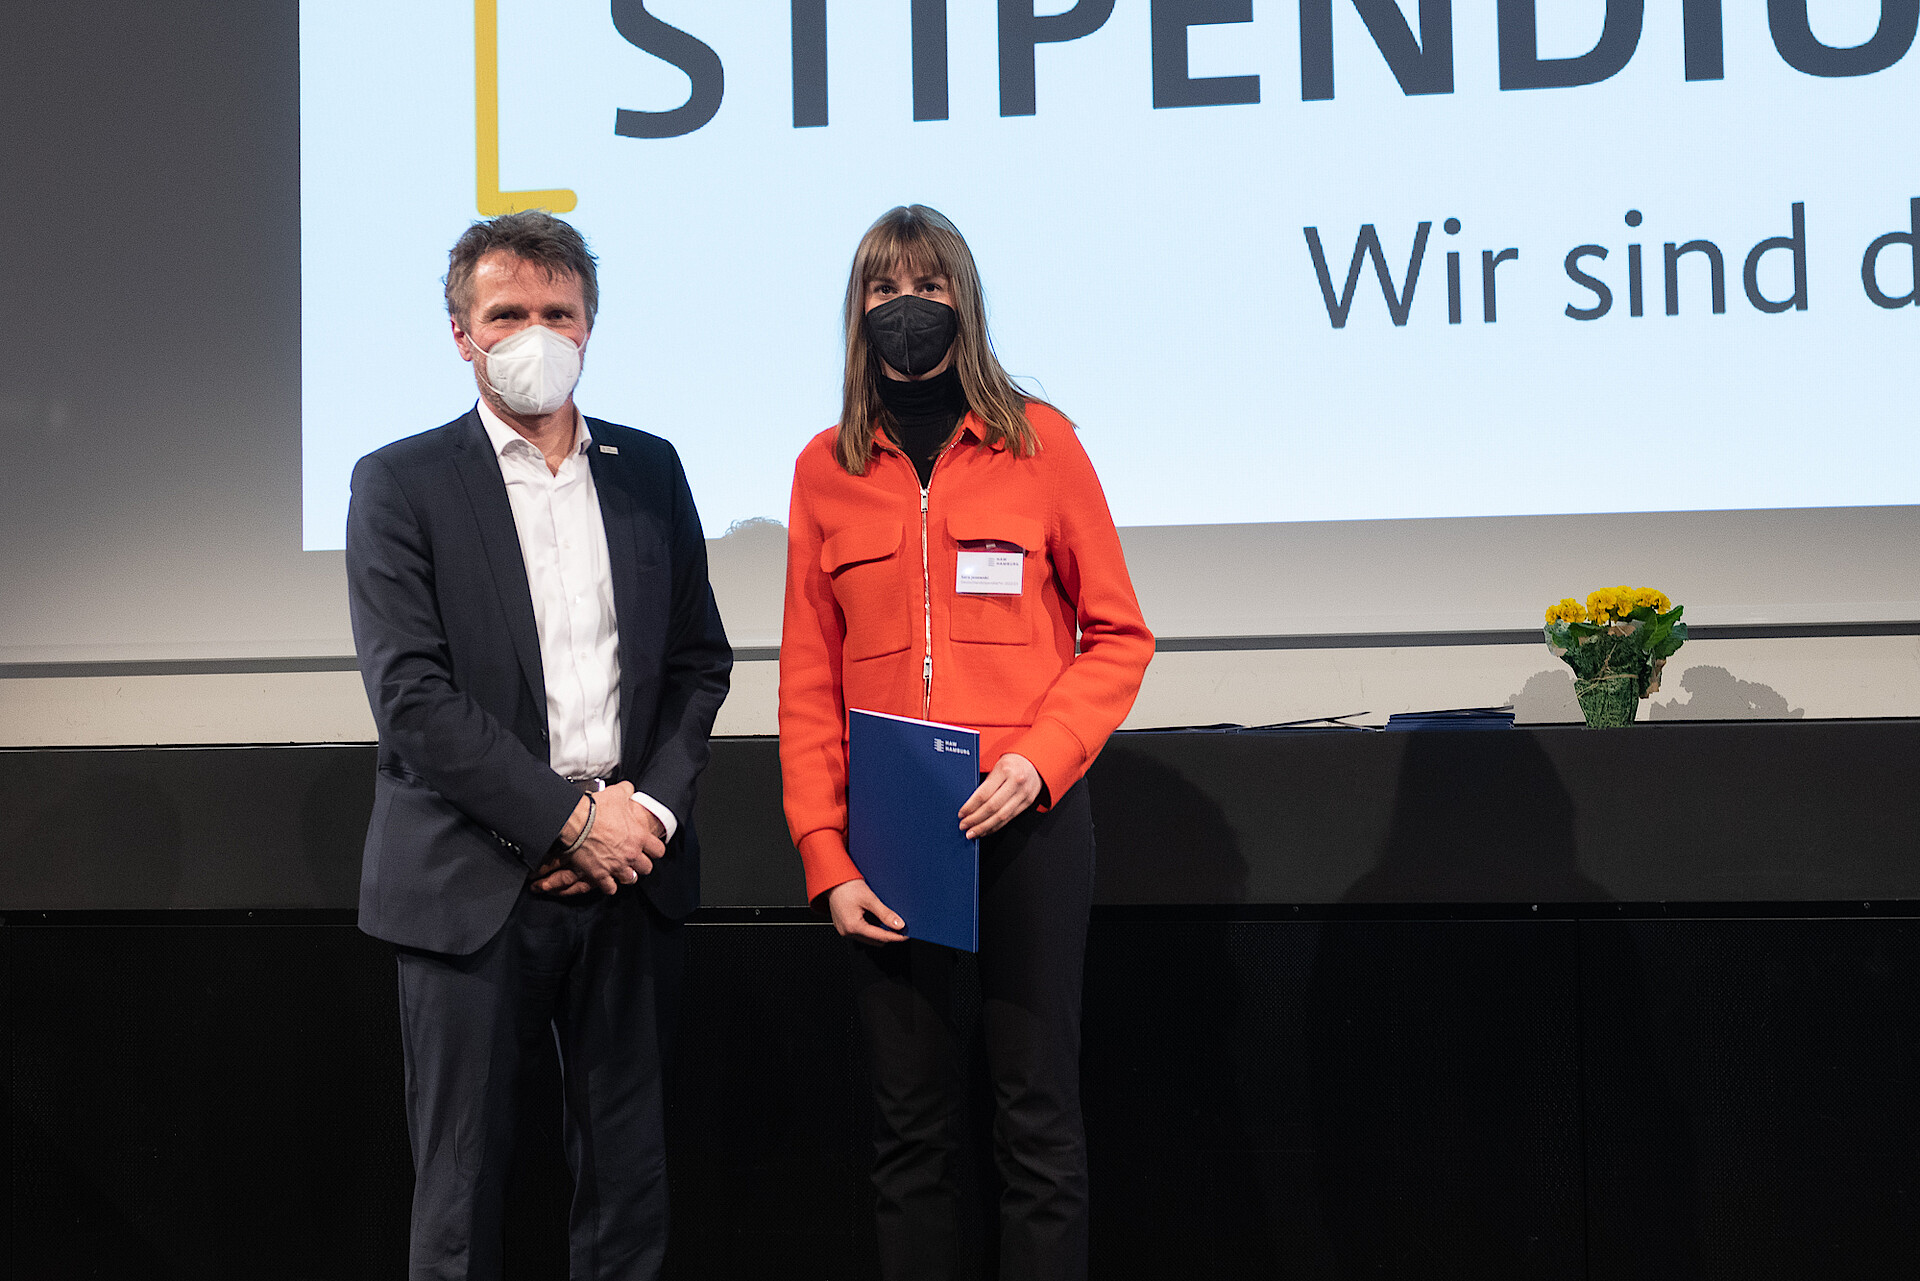 HAW Hamburg invites the new scholarship winners and their sponsors to the awards ceremony at the Forum Finkenau.